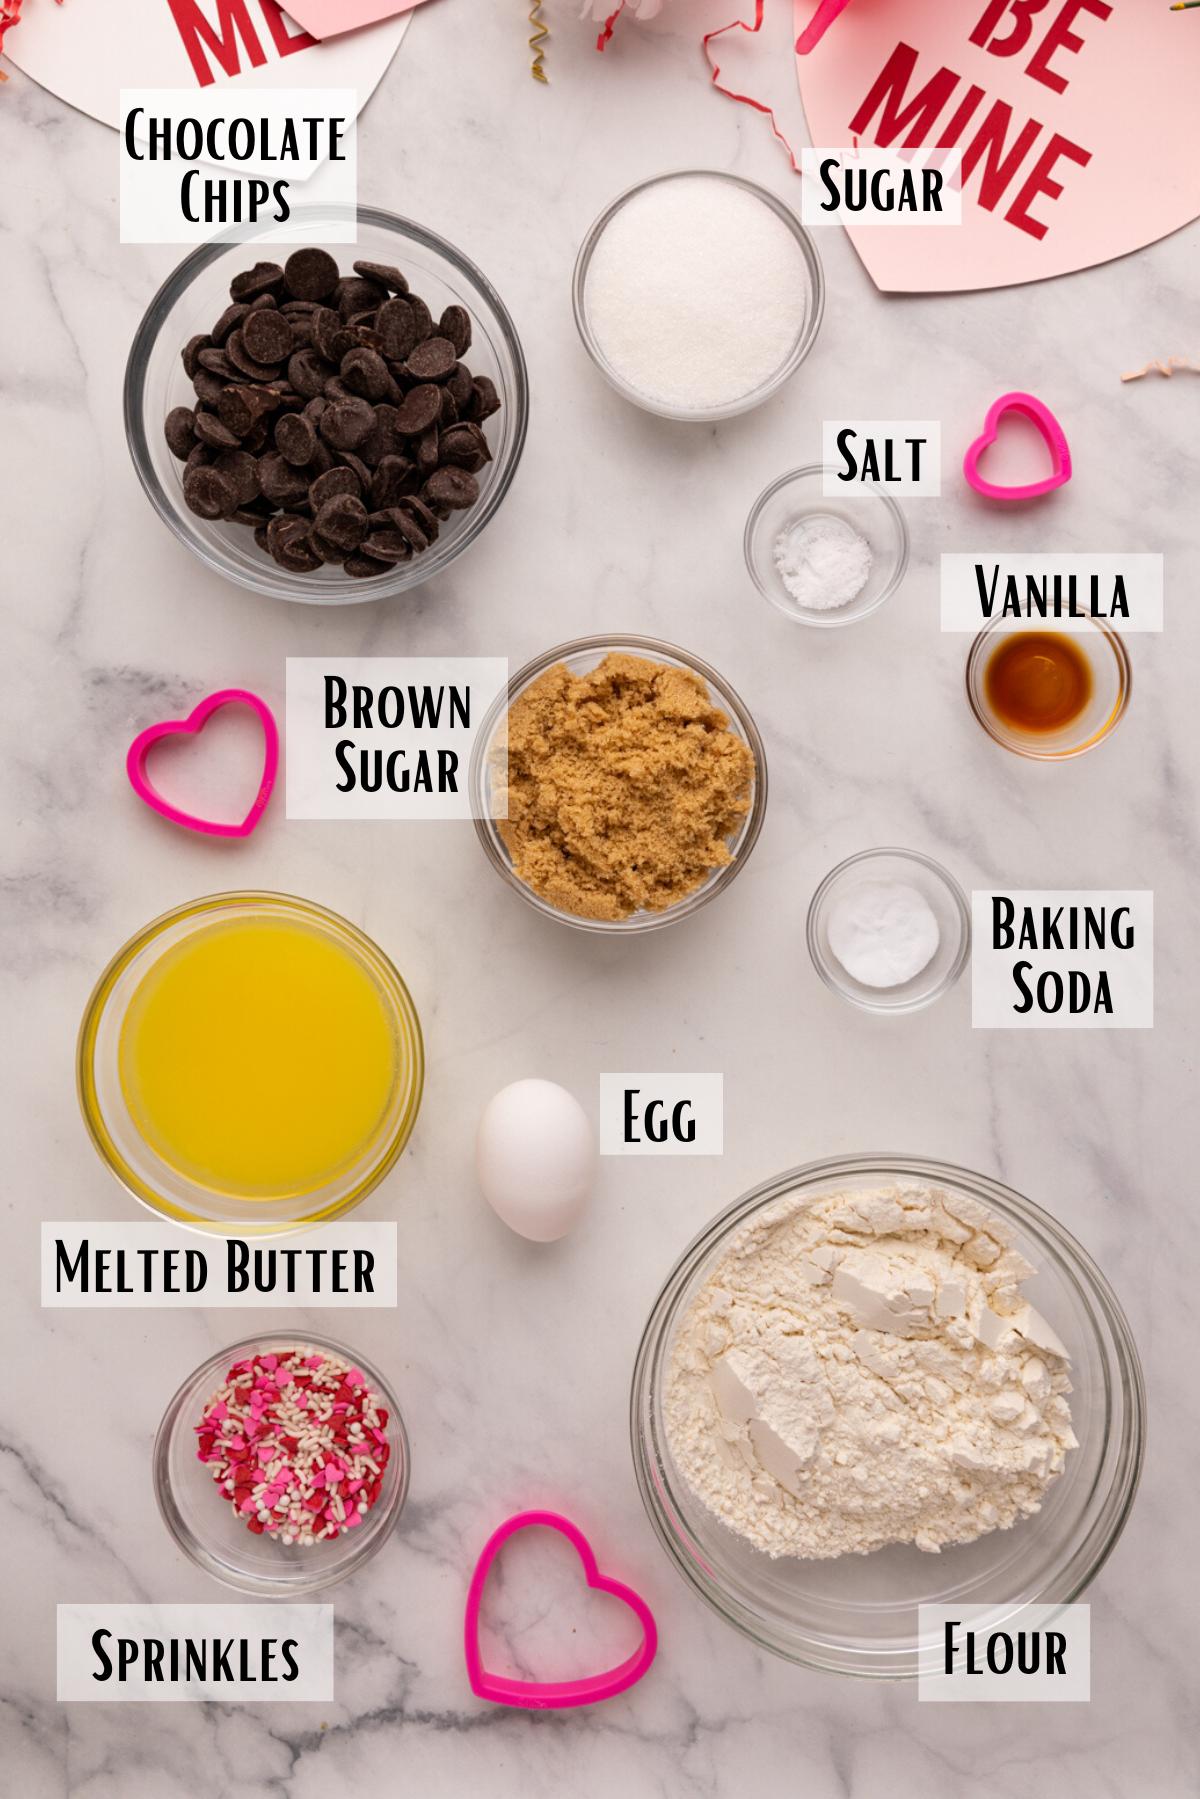 heart shaped chocolate chip cookies ingredients.